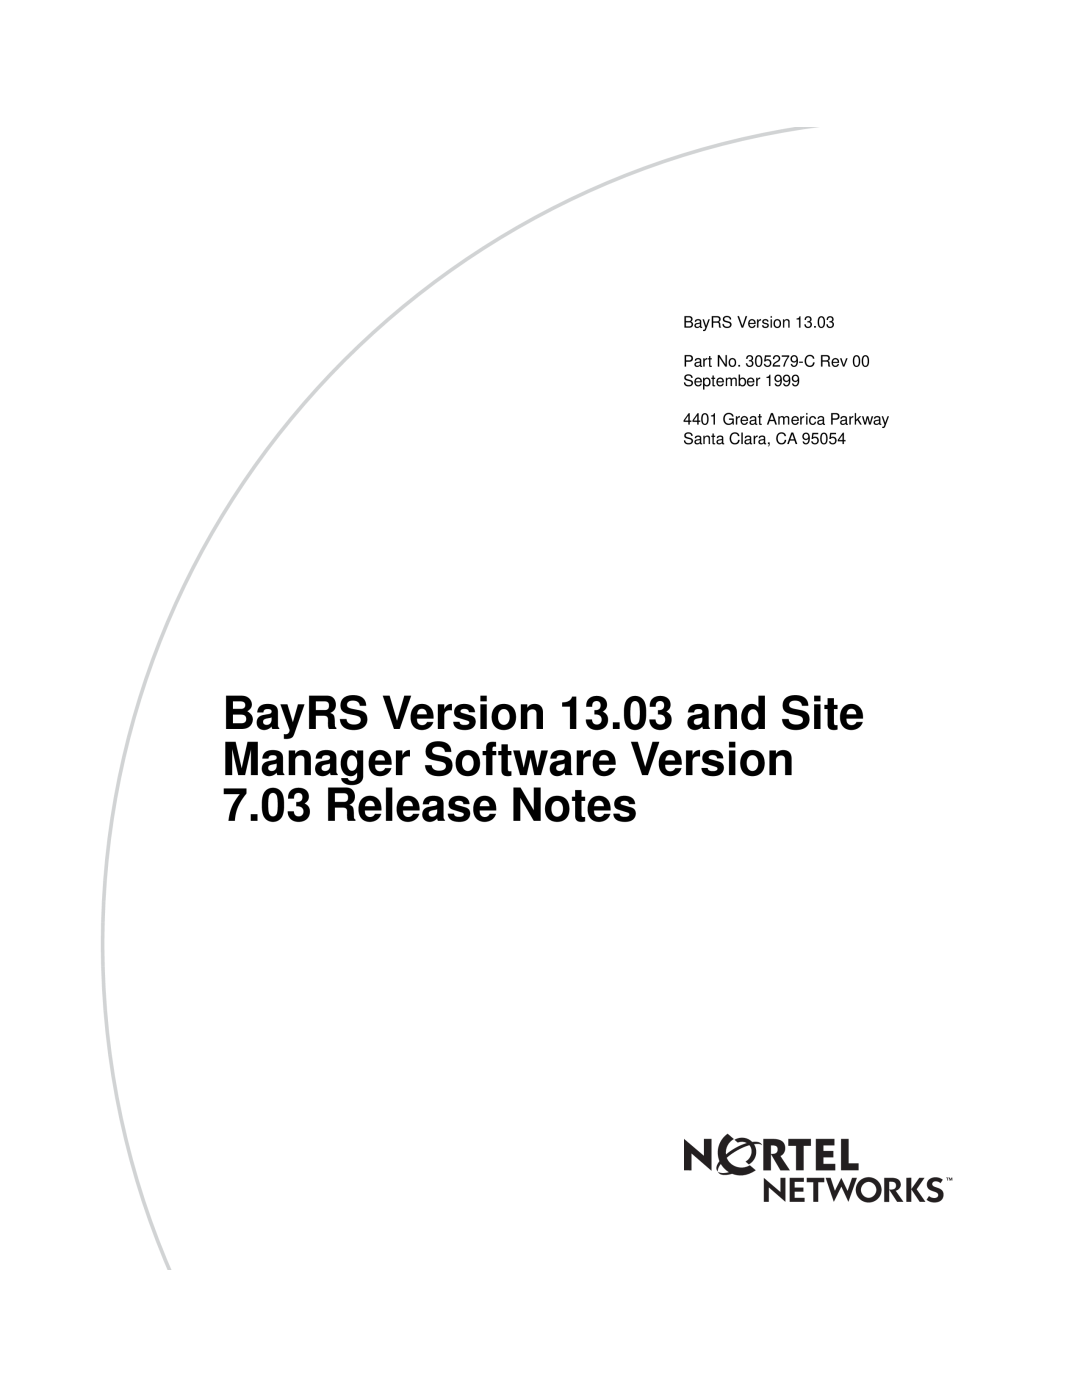 Nortel Networks manual BayRS Version 13.03 and Site Manager Software Version, Release Notes 